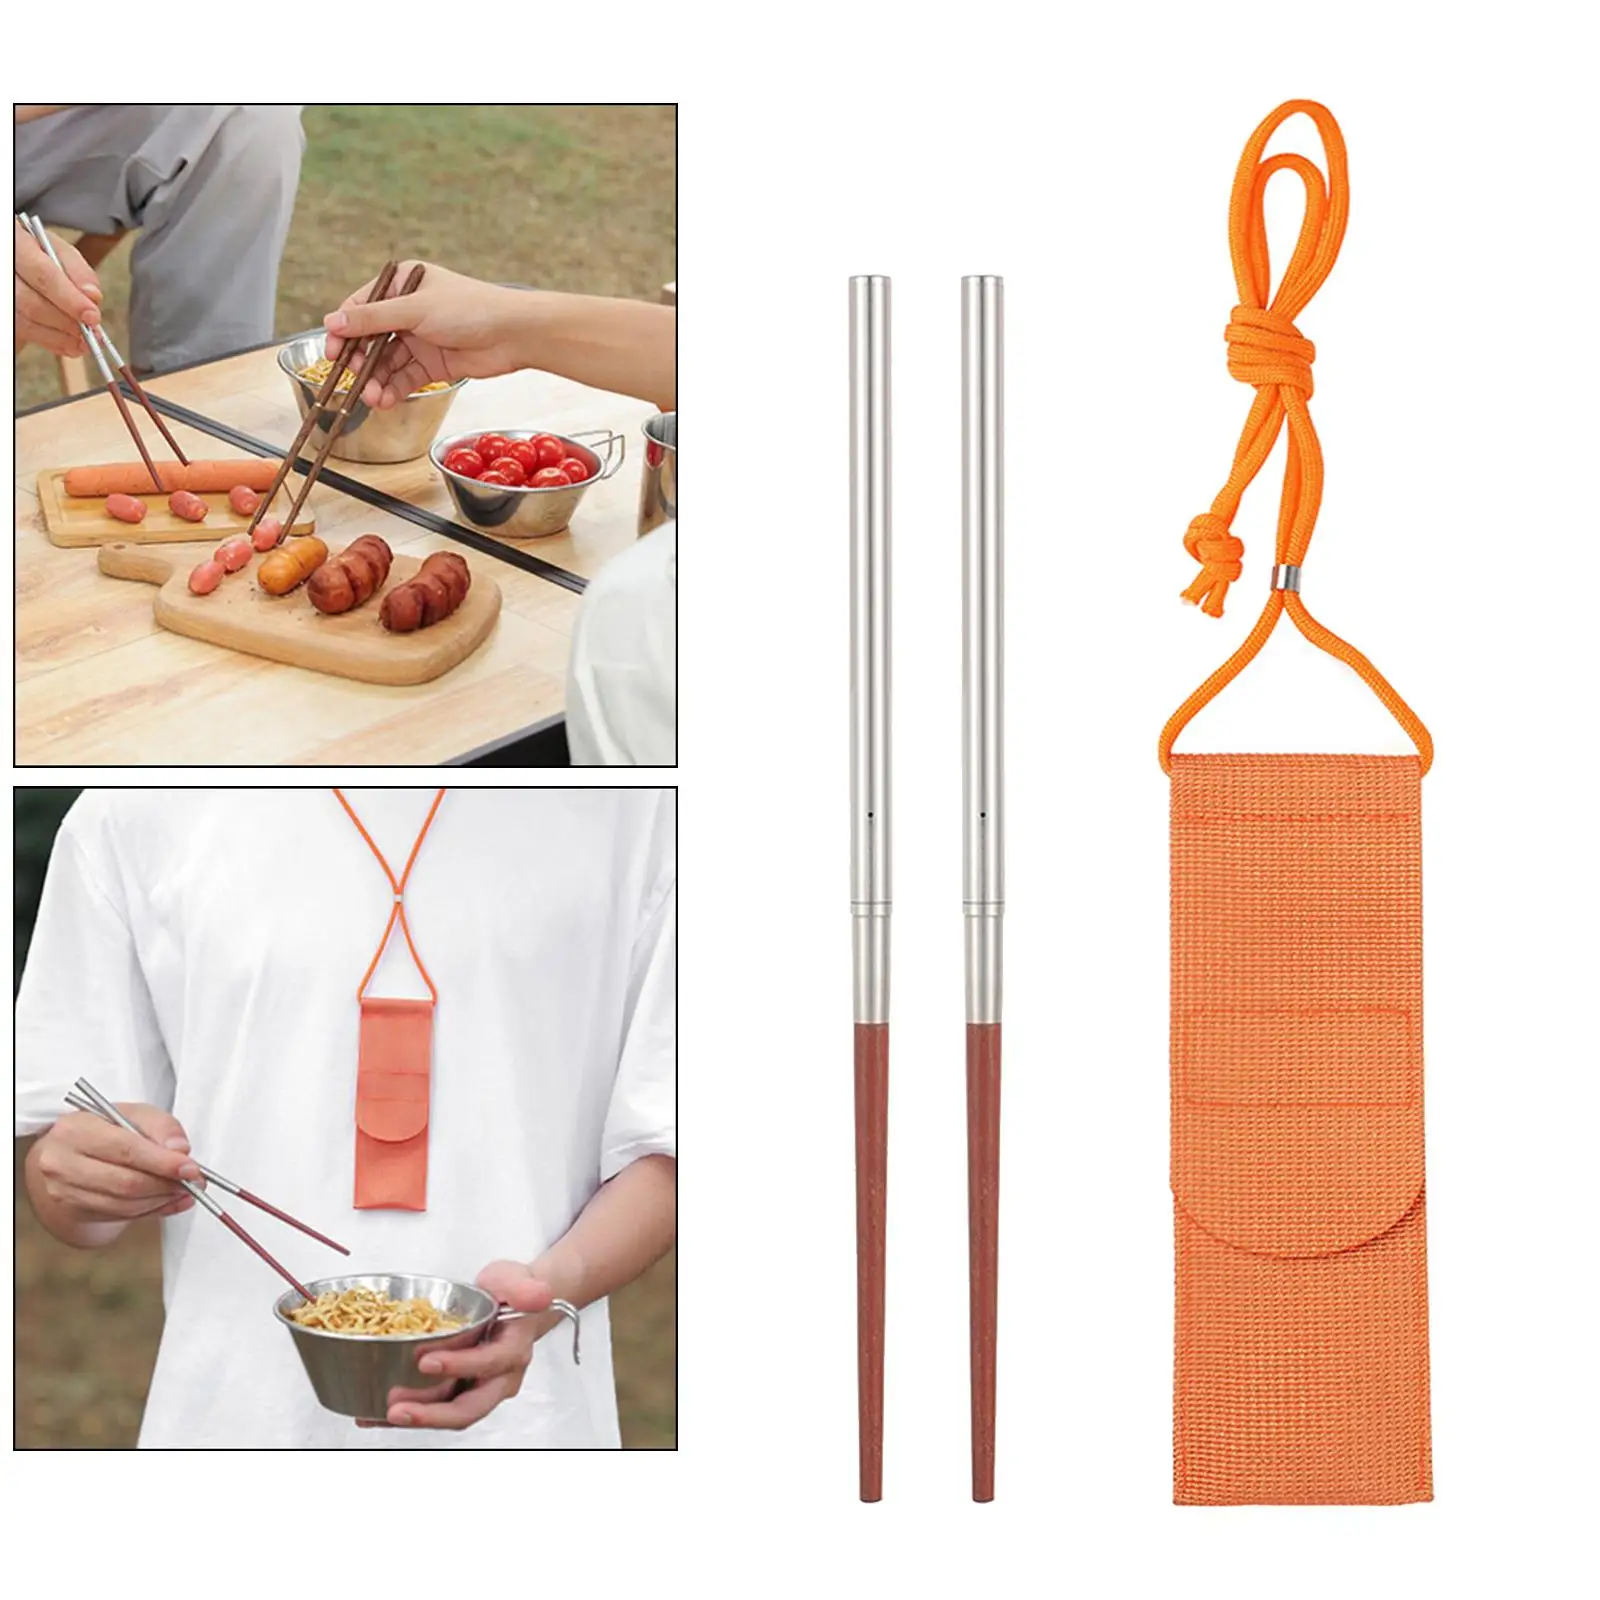 Screw-on / Separate Stainless Steel Wooden Chopsticks Reusable Travel Foldable Chopsticks with Pouch